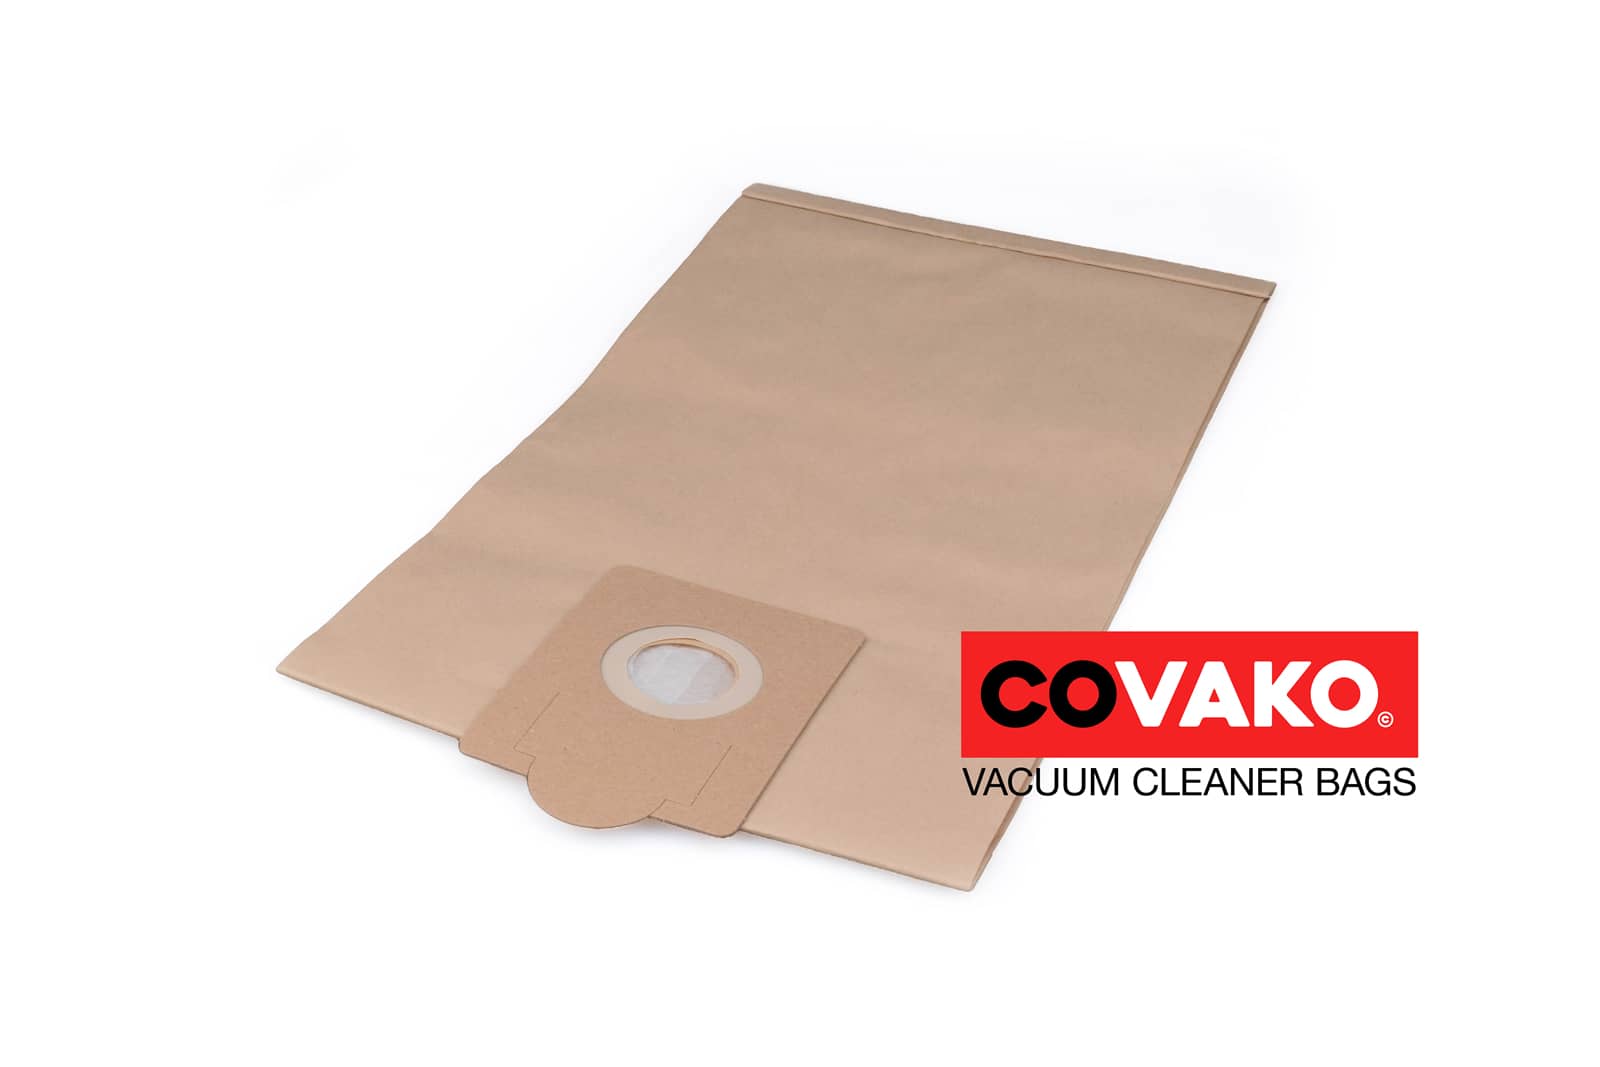 Eurom Force 1420 S wet/dry / Paper - Eurom vacuum cleaner bags